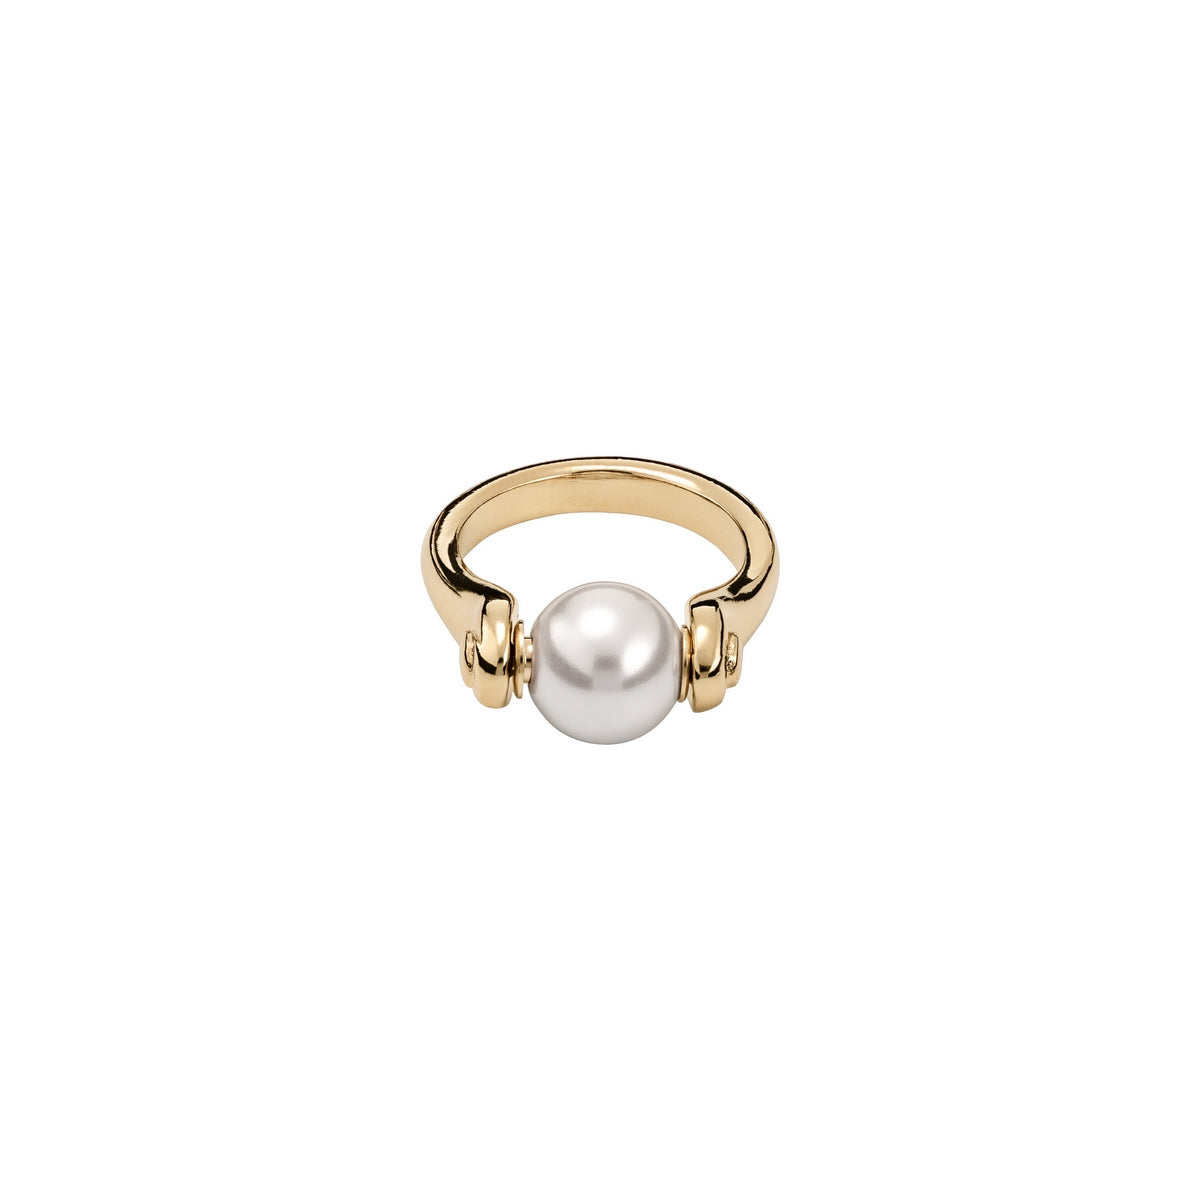 uno de 50 full pearlmoon gold-plated metal alloy ring with small pearl